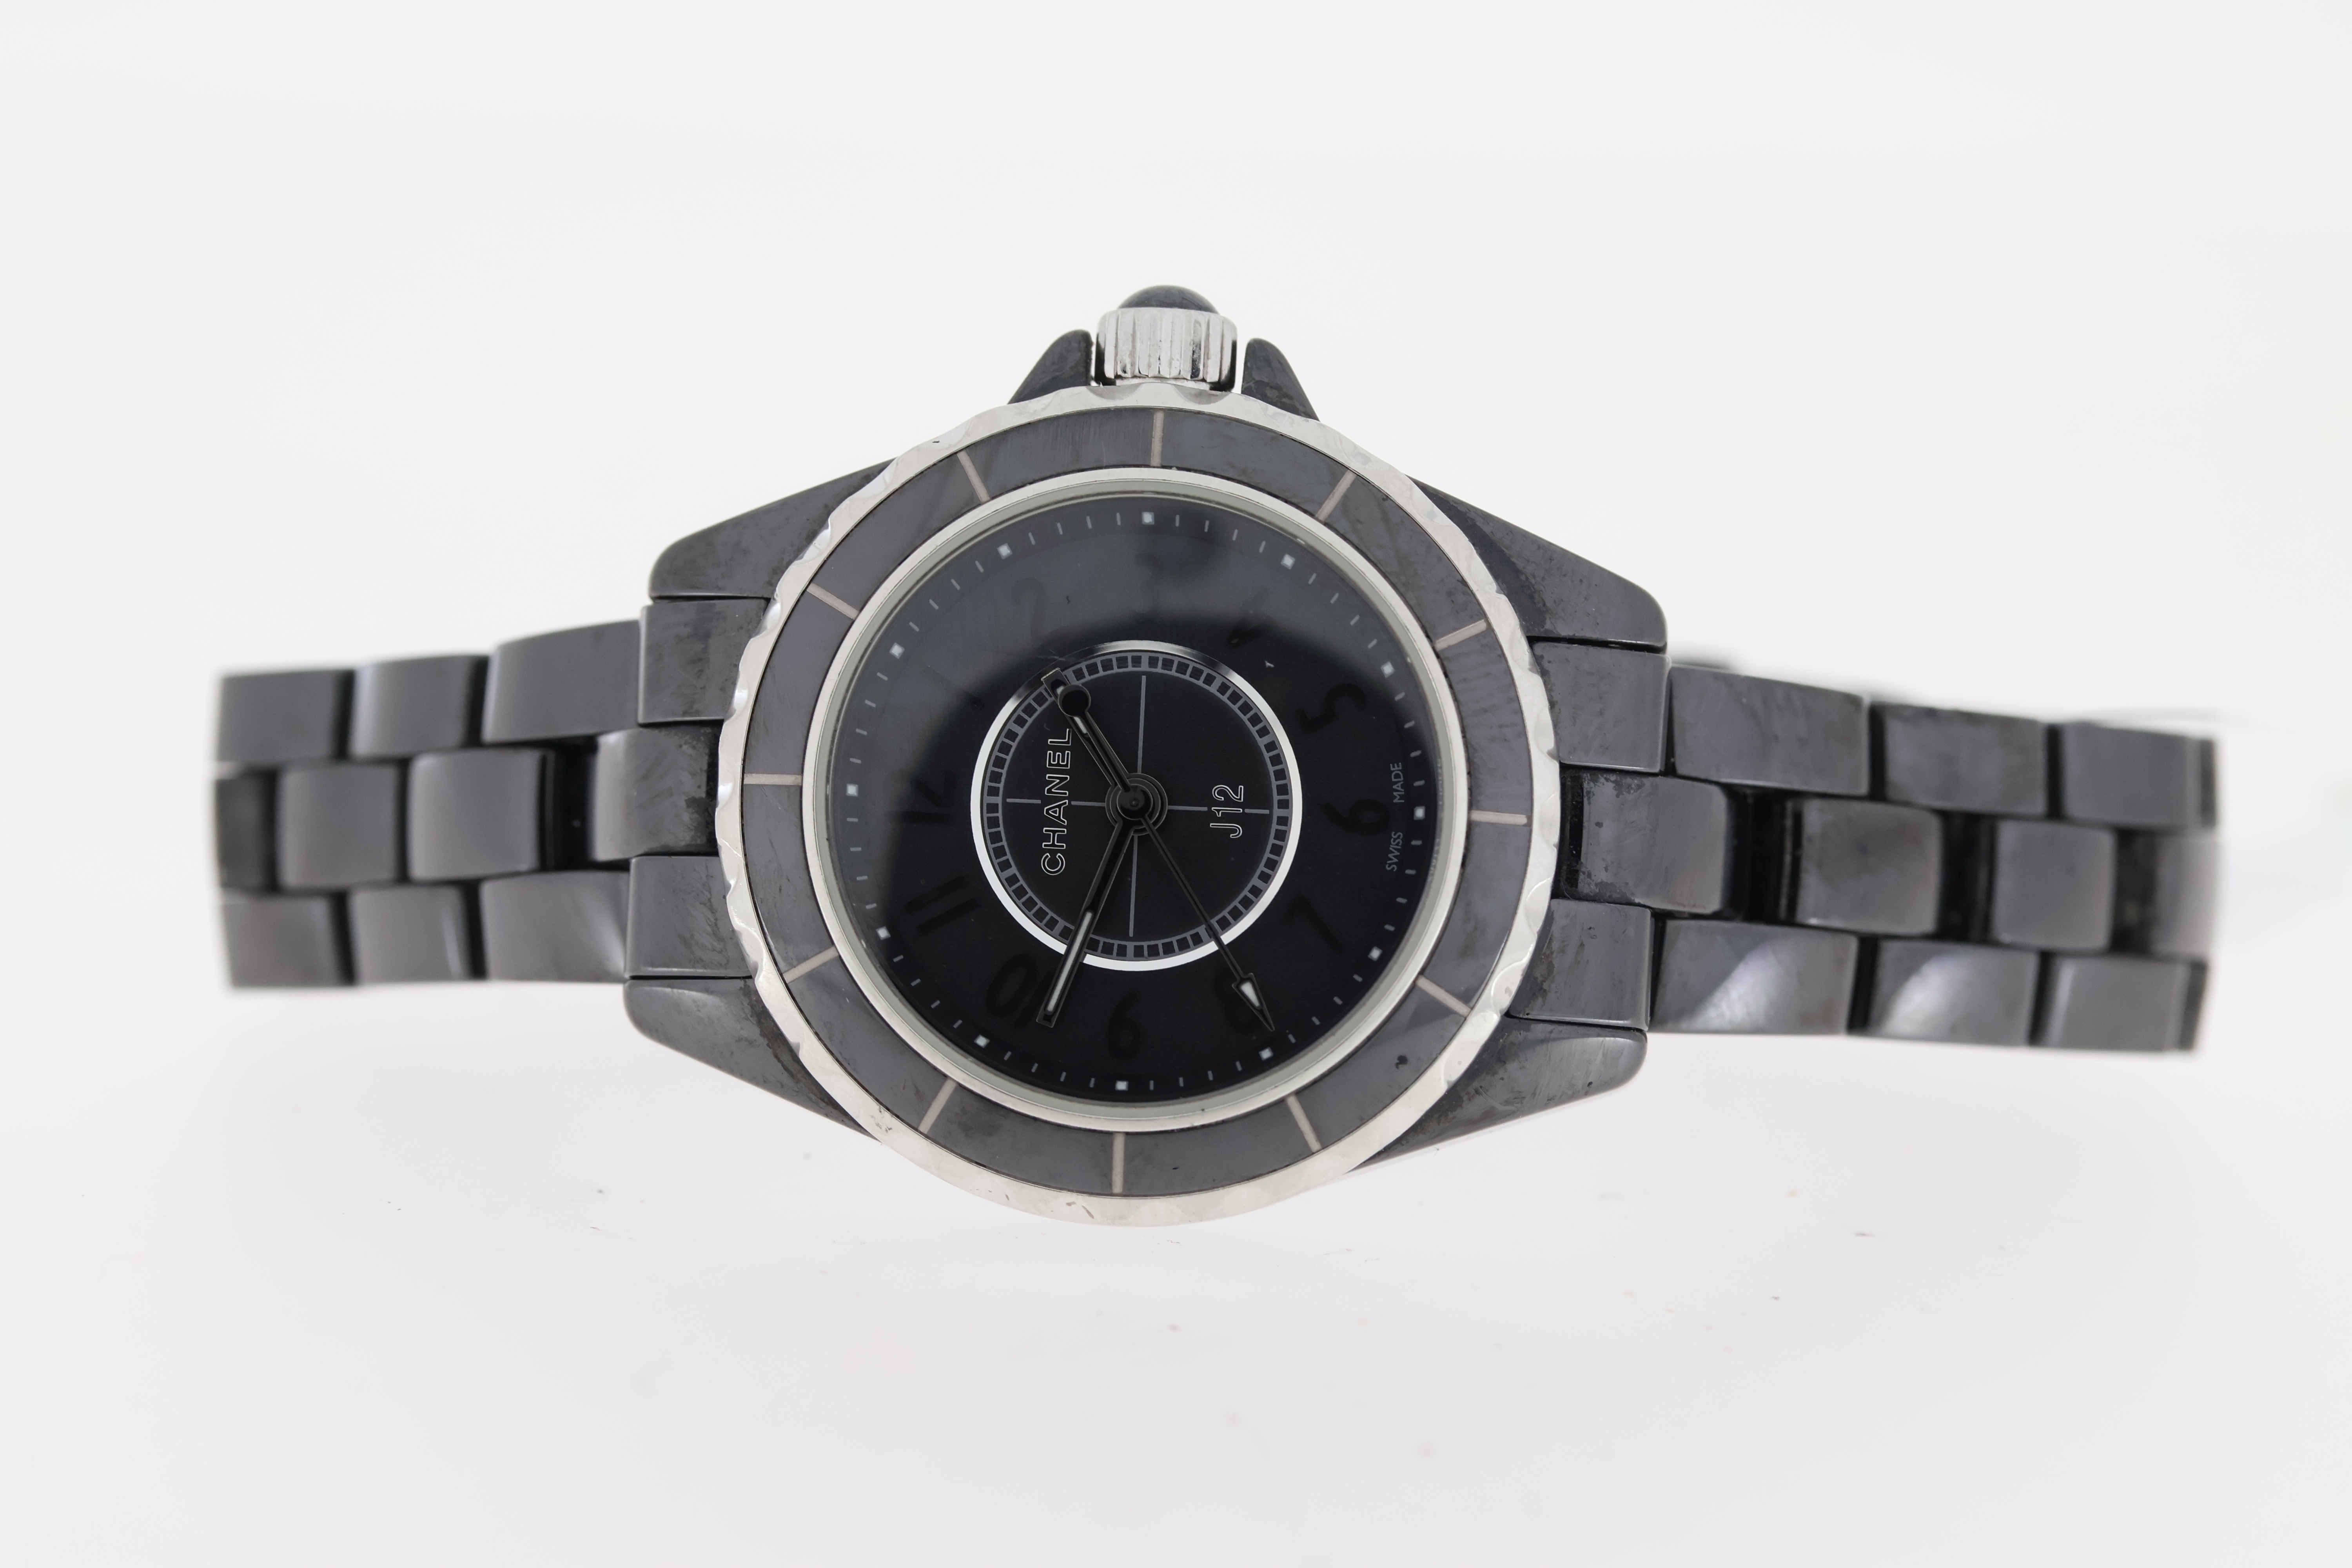 LADIES CHANEL J12 CERAMIC WITH BOX, Approx 29mm black ceramic case with a screw down case back. - Image 2 of 5